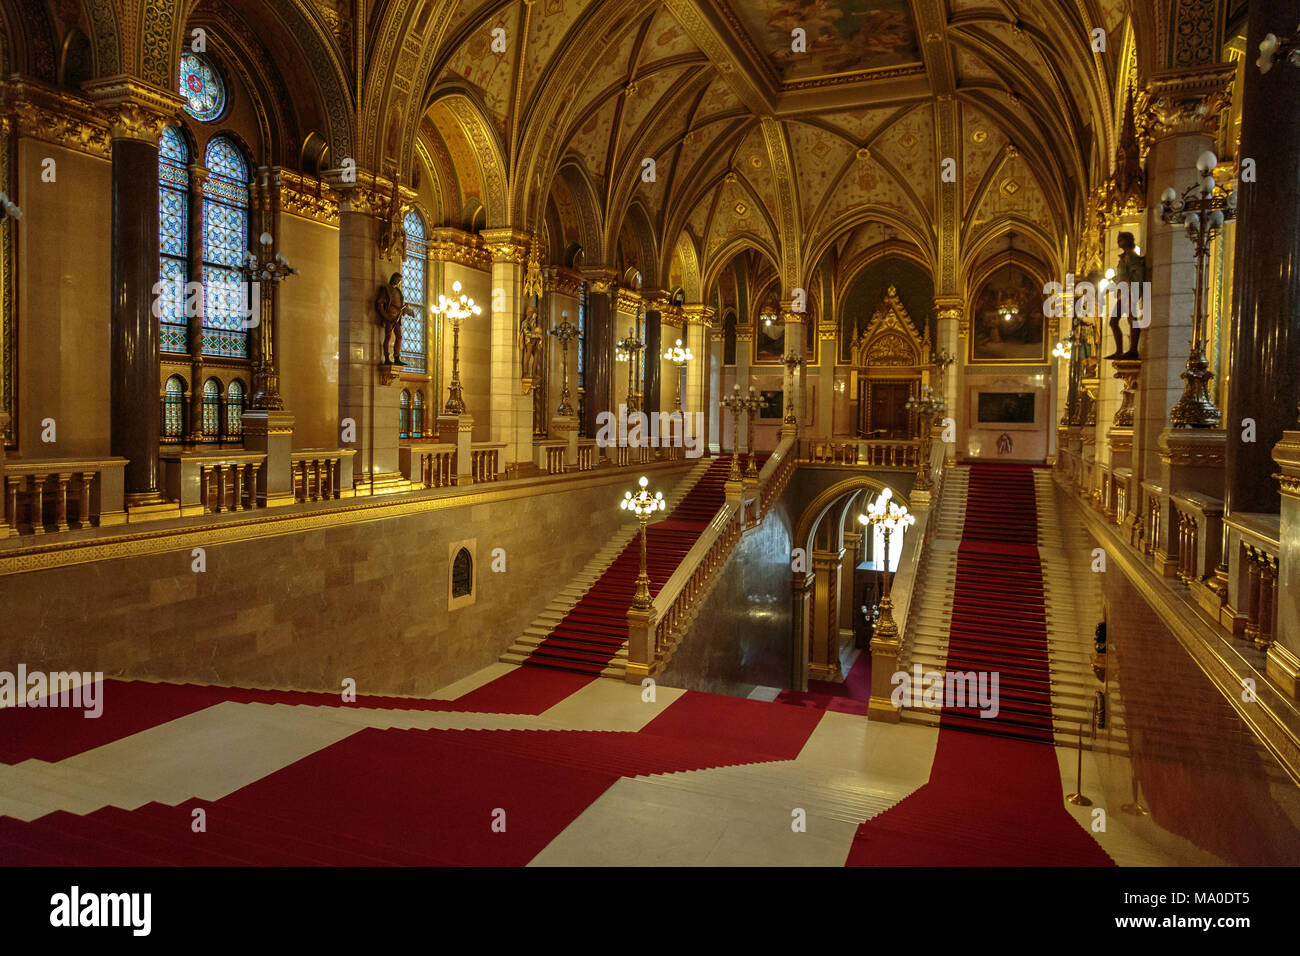 Budapest (Hungary) - Main Hall of the Hungarian Parliament Building Stock Photo